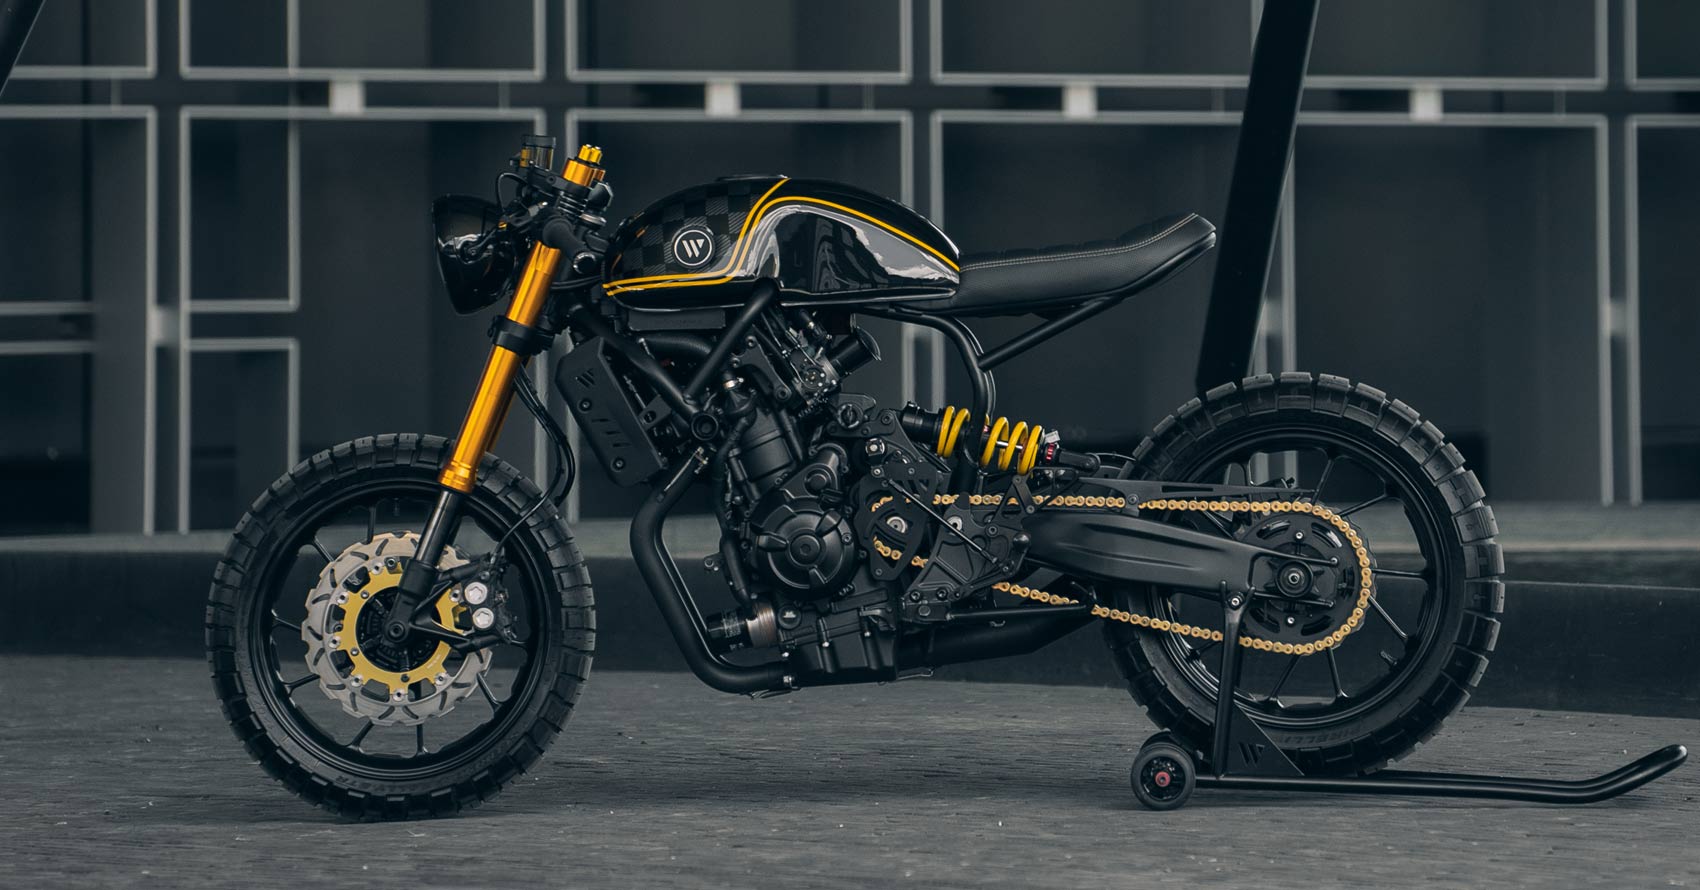 Louis Vuitton wrapped MT-07 - Gear Heads: Motorcycles